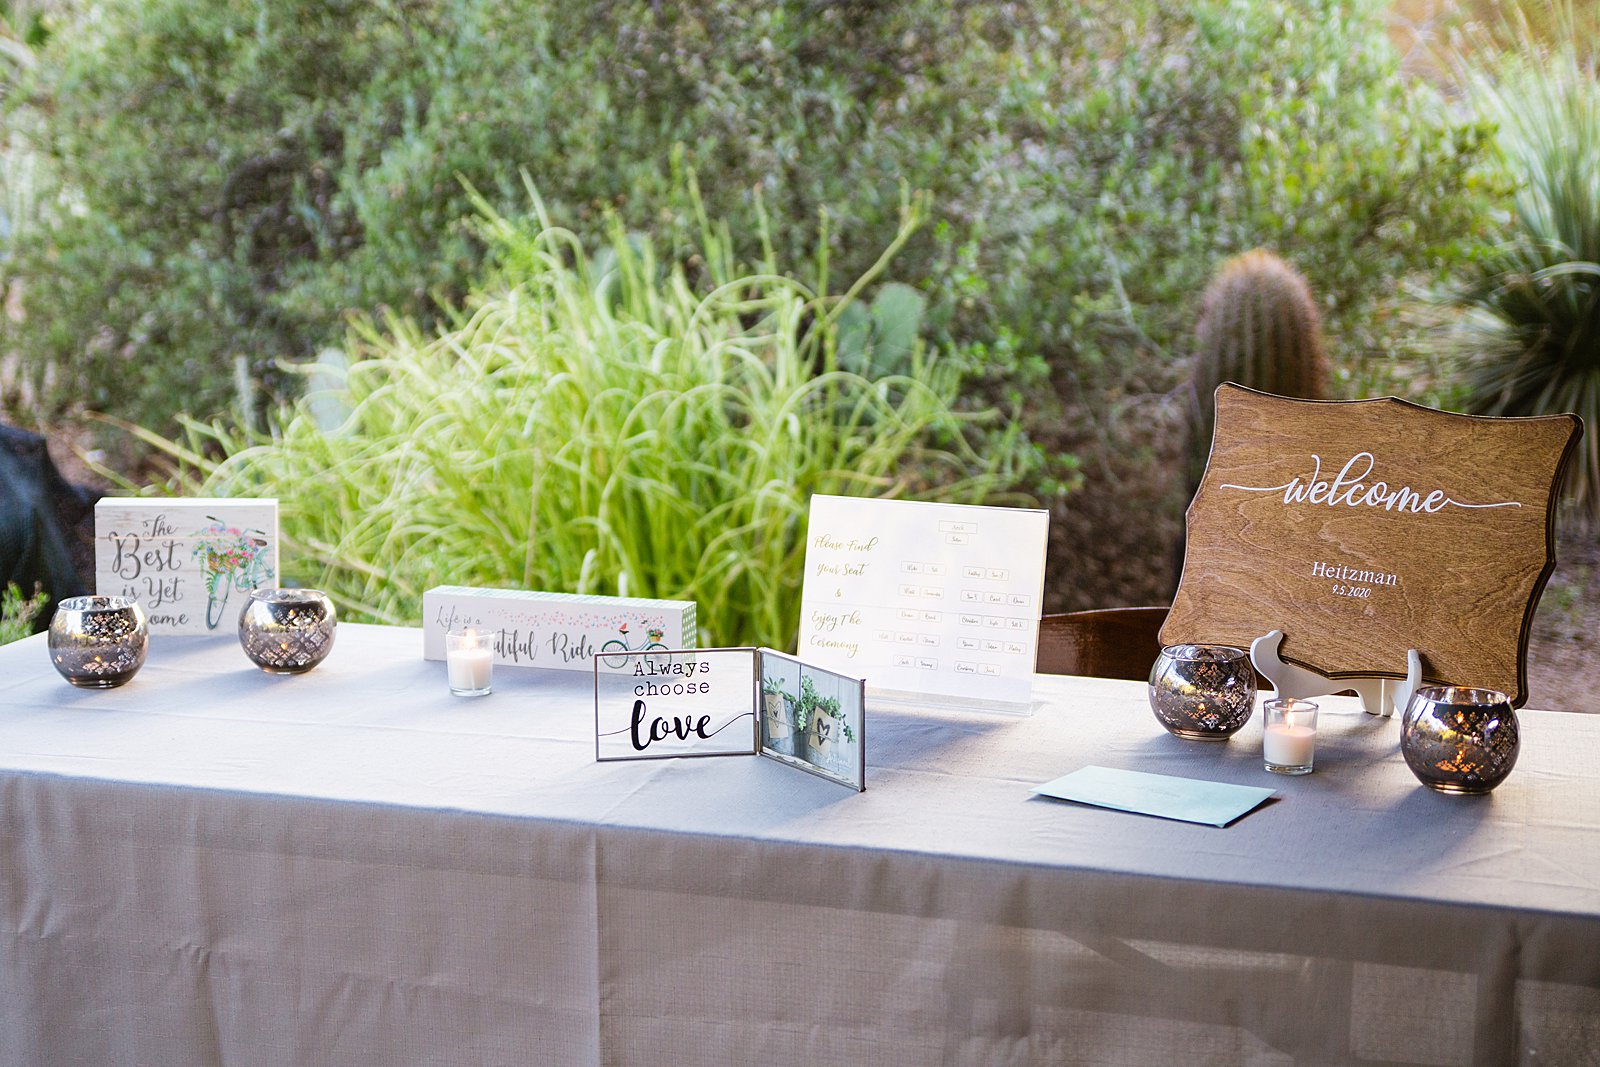 Welcome and card table decorations at a Desert Botanical Garden wedding by Phoenxi wedding photographer PMA Photography.